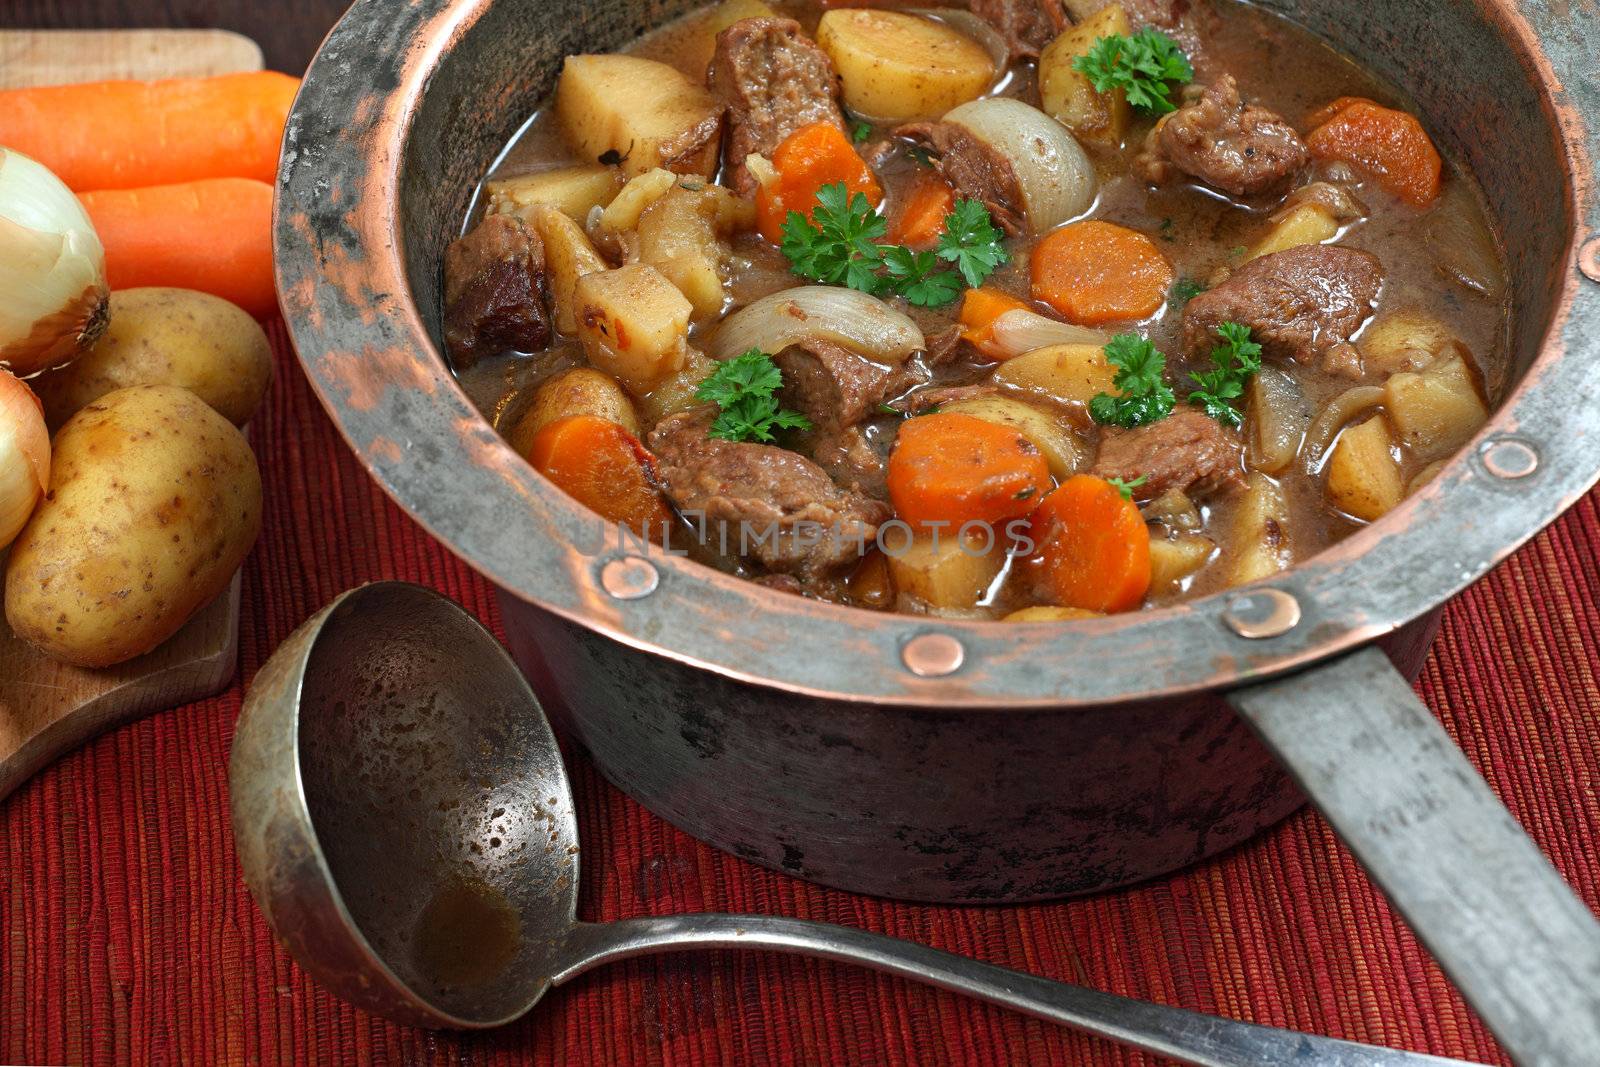 Irish stew in old copper pot by sumners